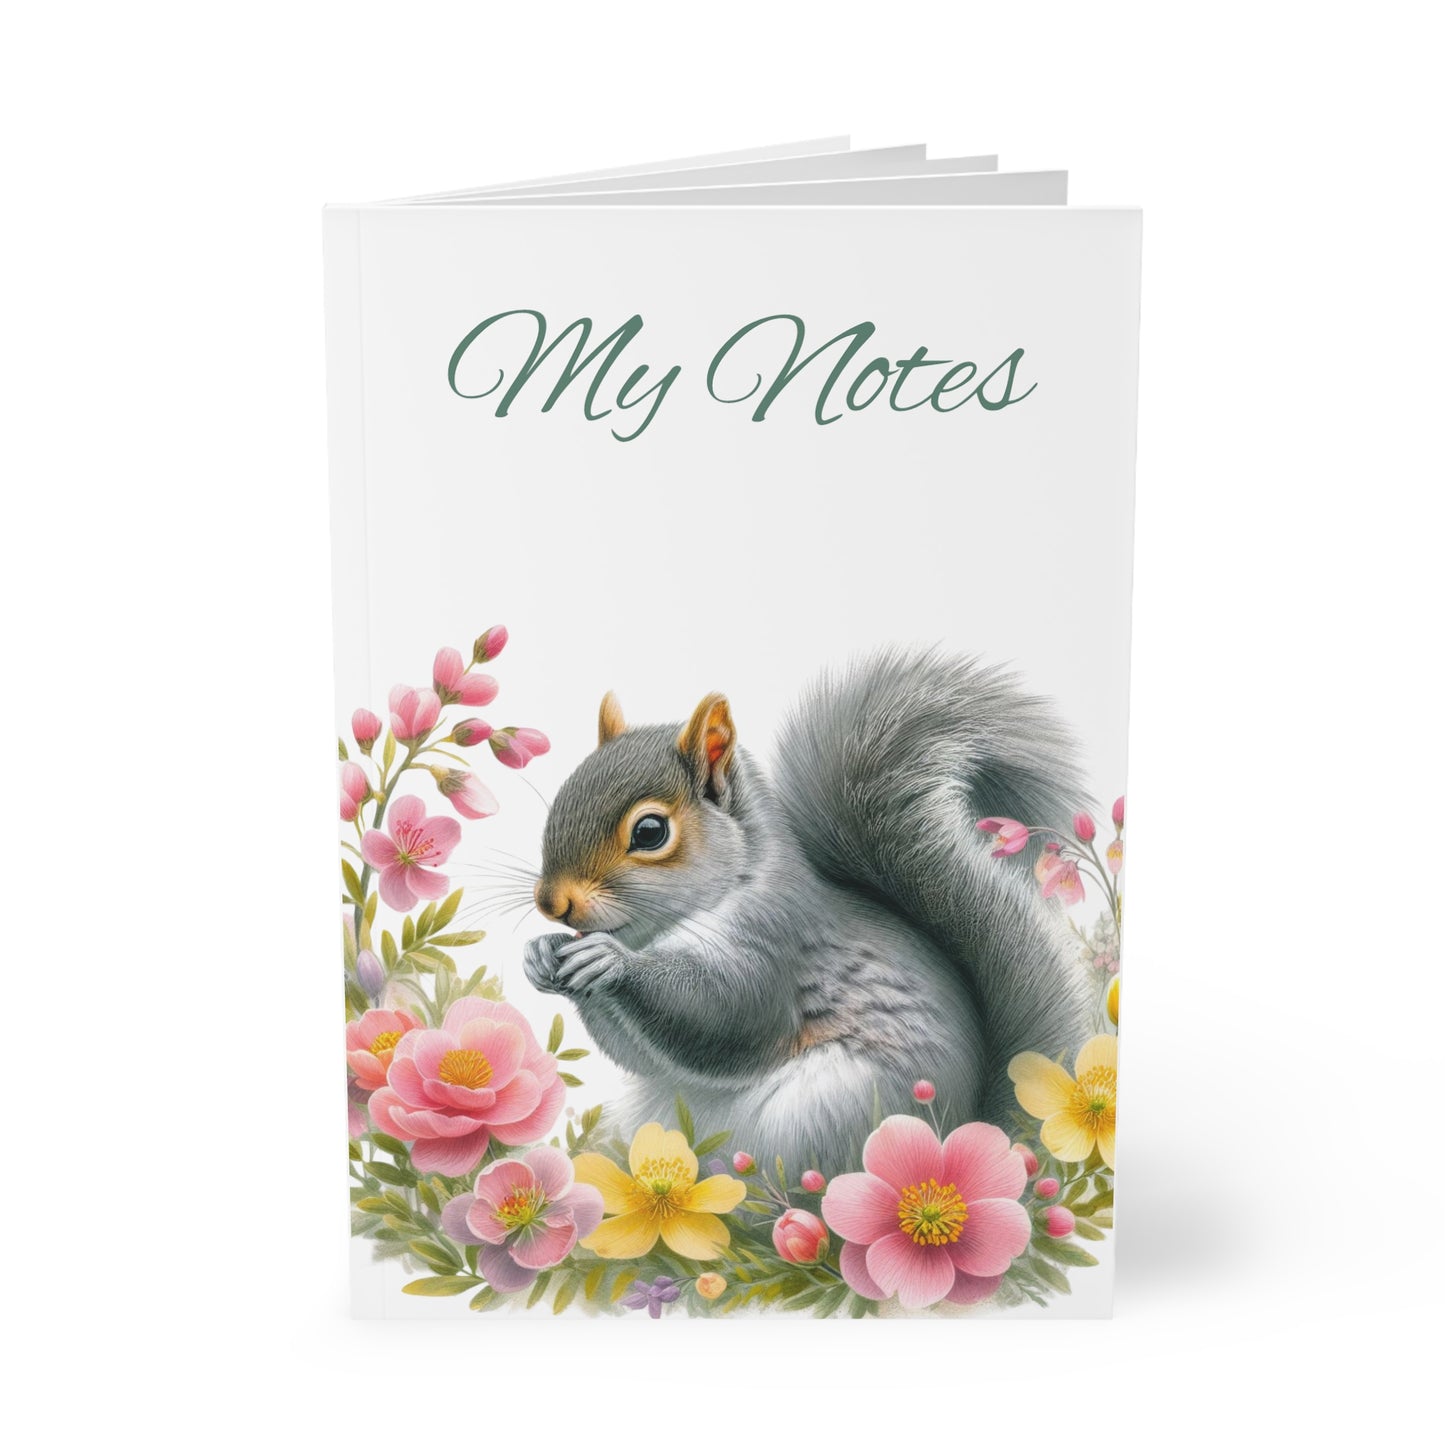 Squirrel Softback Notebook | Stationery by Hope Valley Home